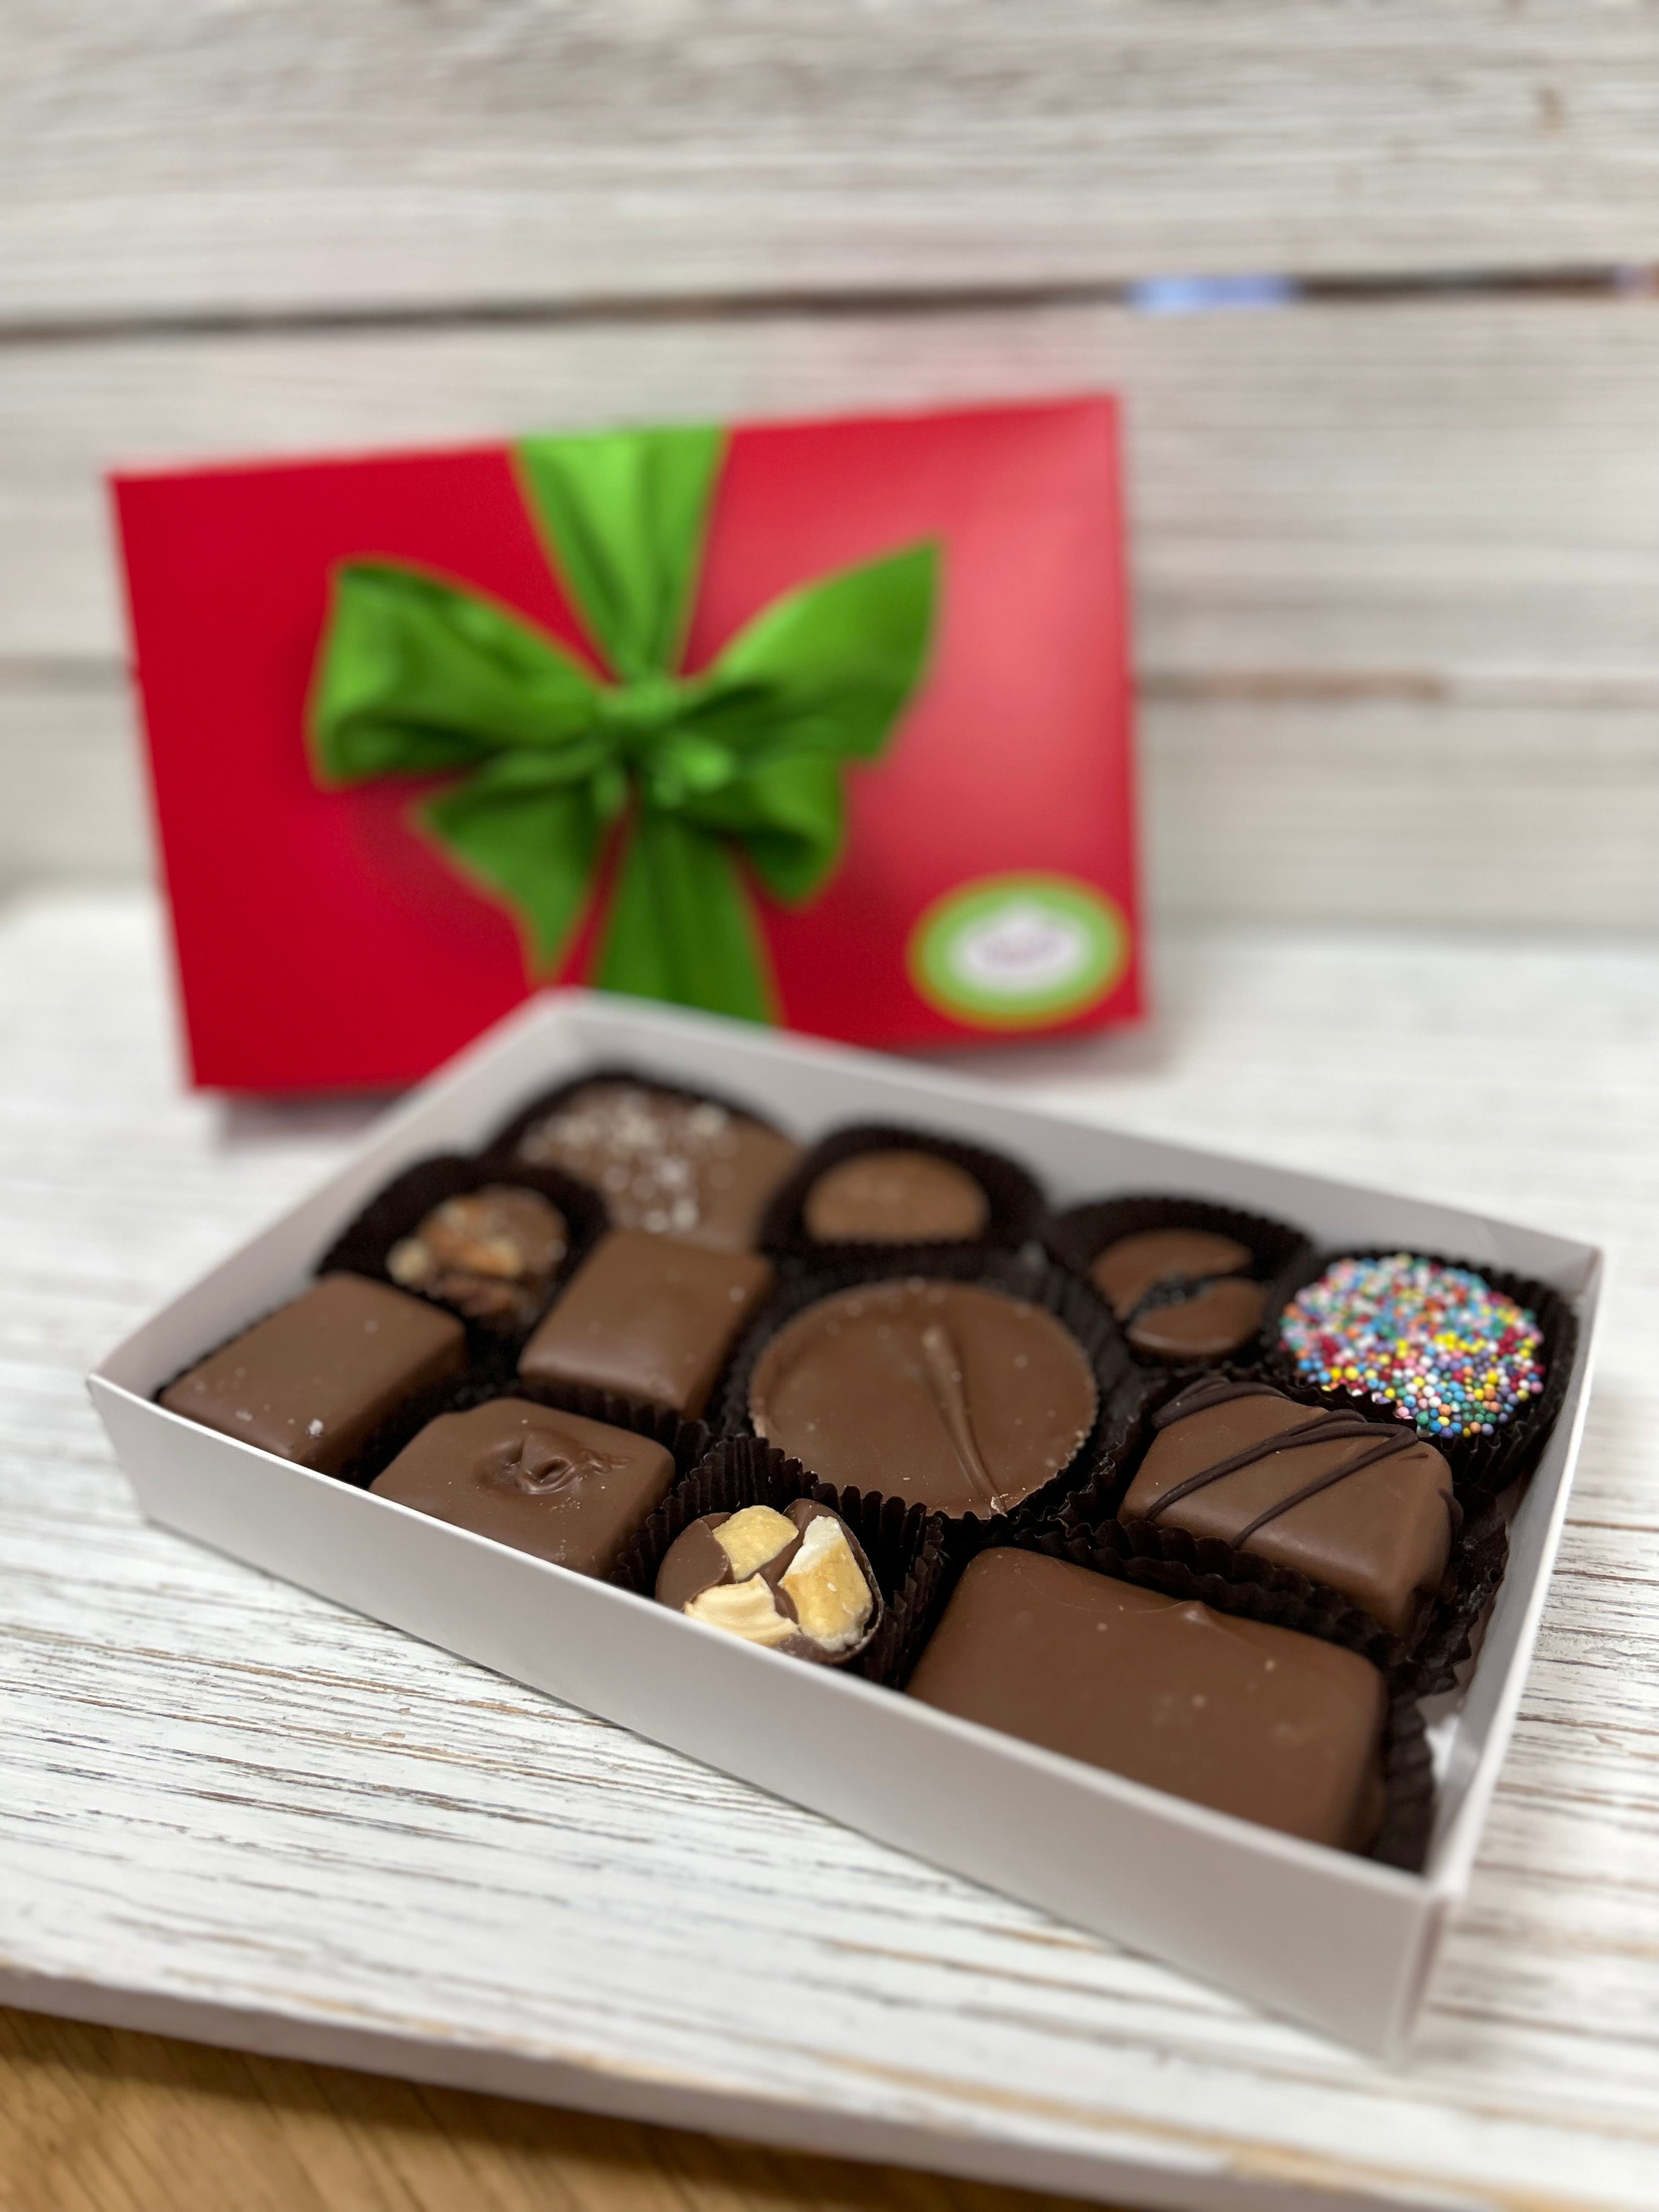 Chocolate, Toffee, Nuts, & Gifts / Favors, Retail & Wholesale – Sweet P's  Pantry